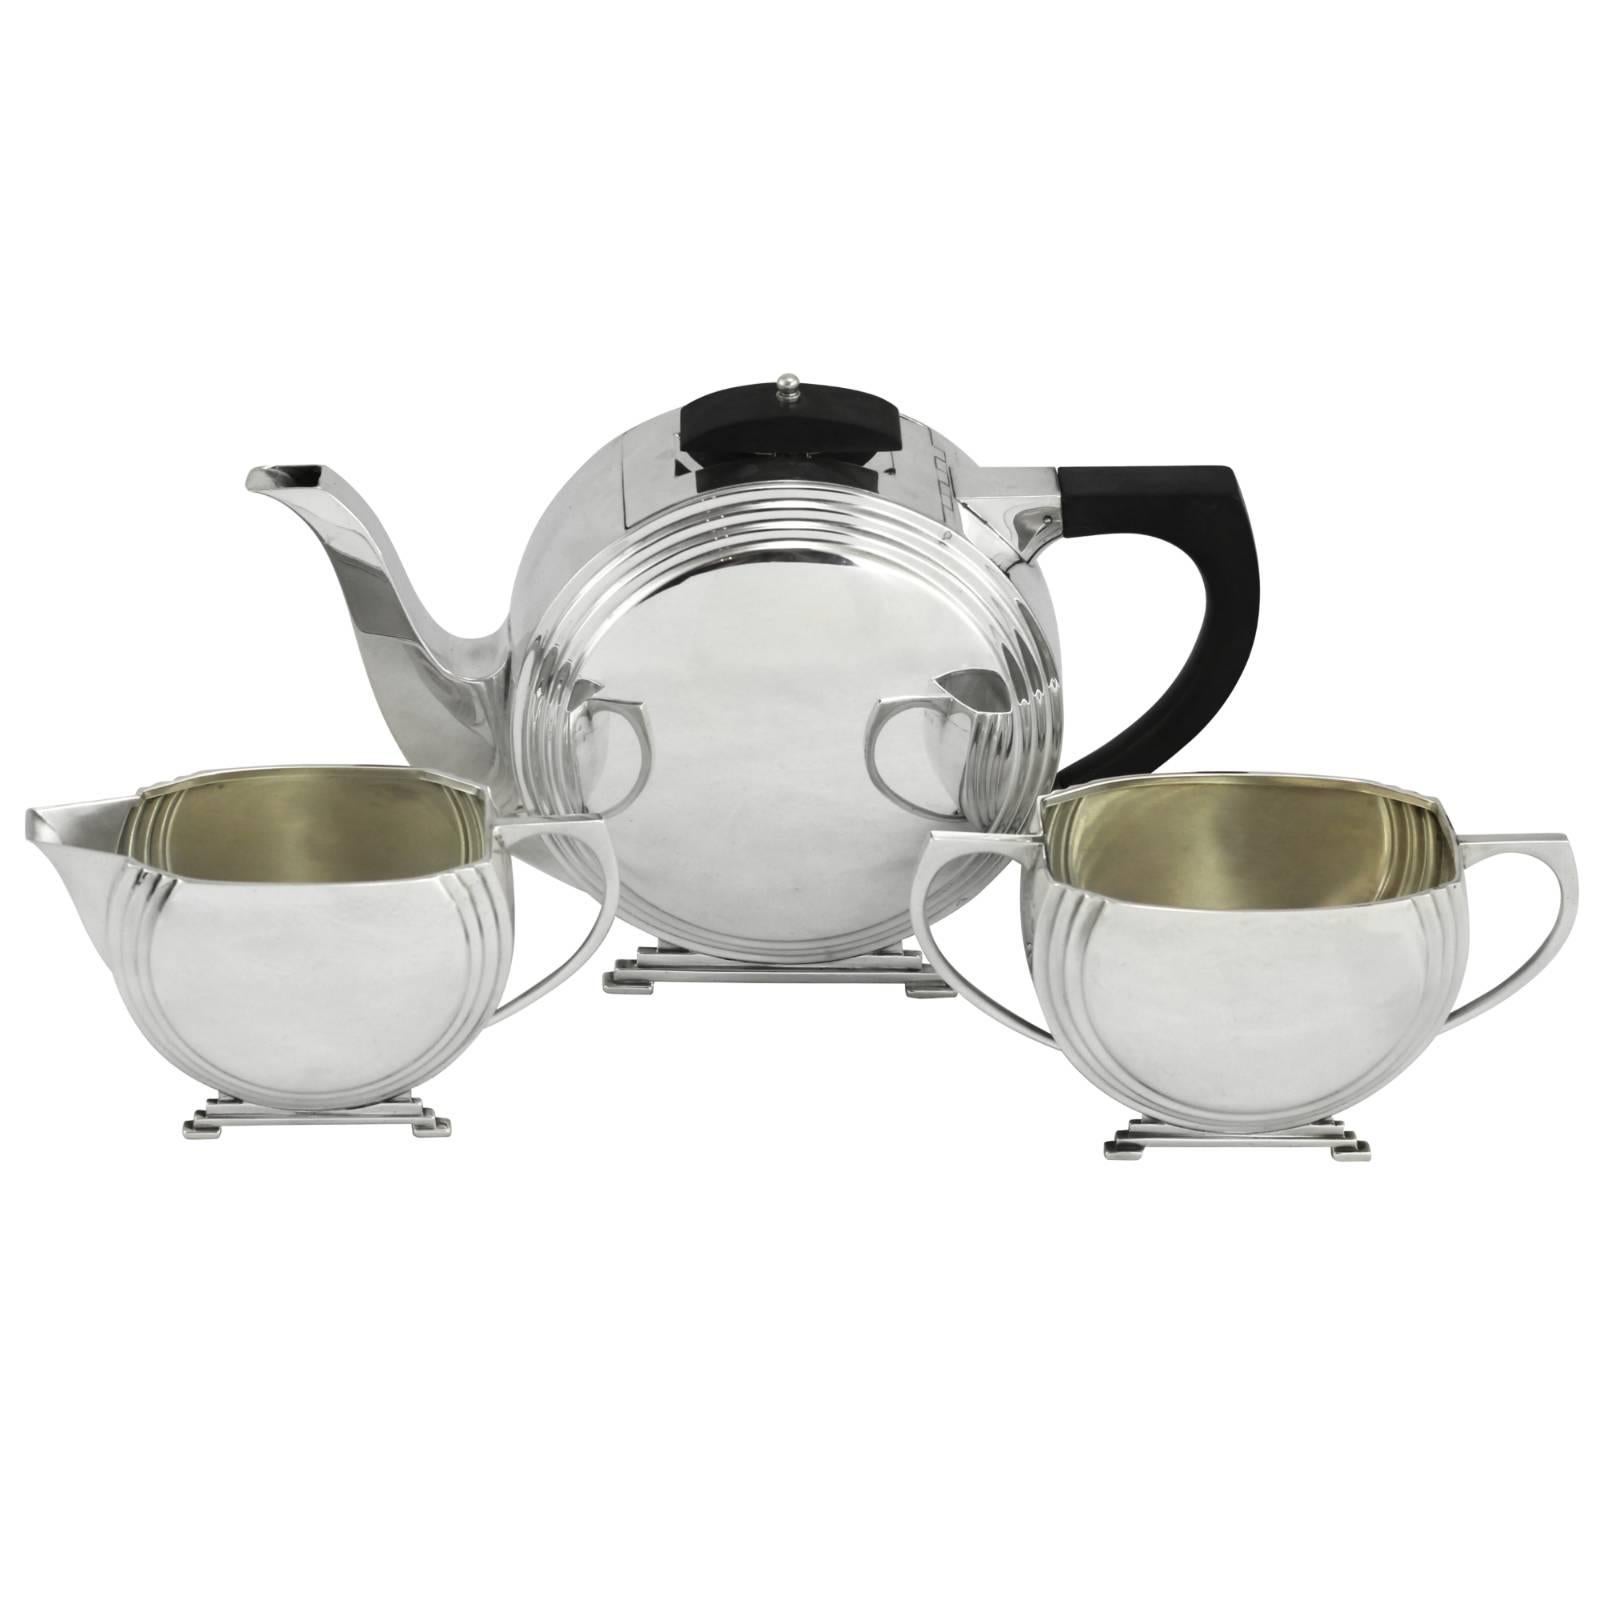 Early 20th Century Art Deco Sterling Silver Tea Set with Ebony Finial and Handle For Sale